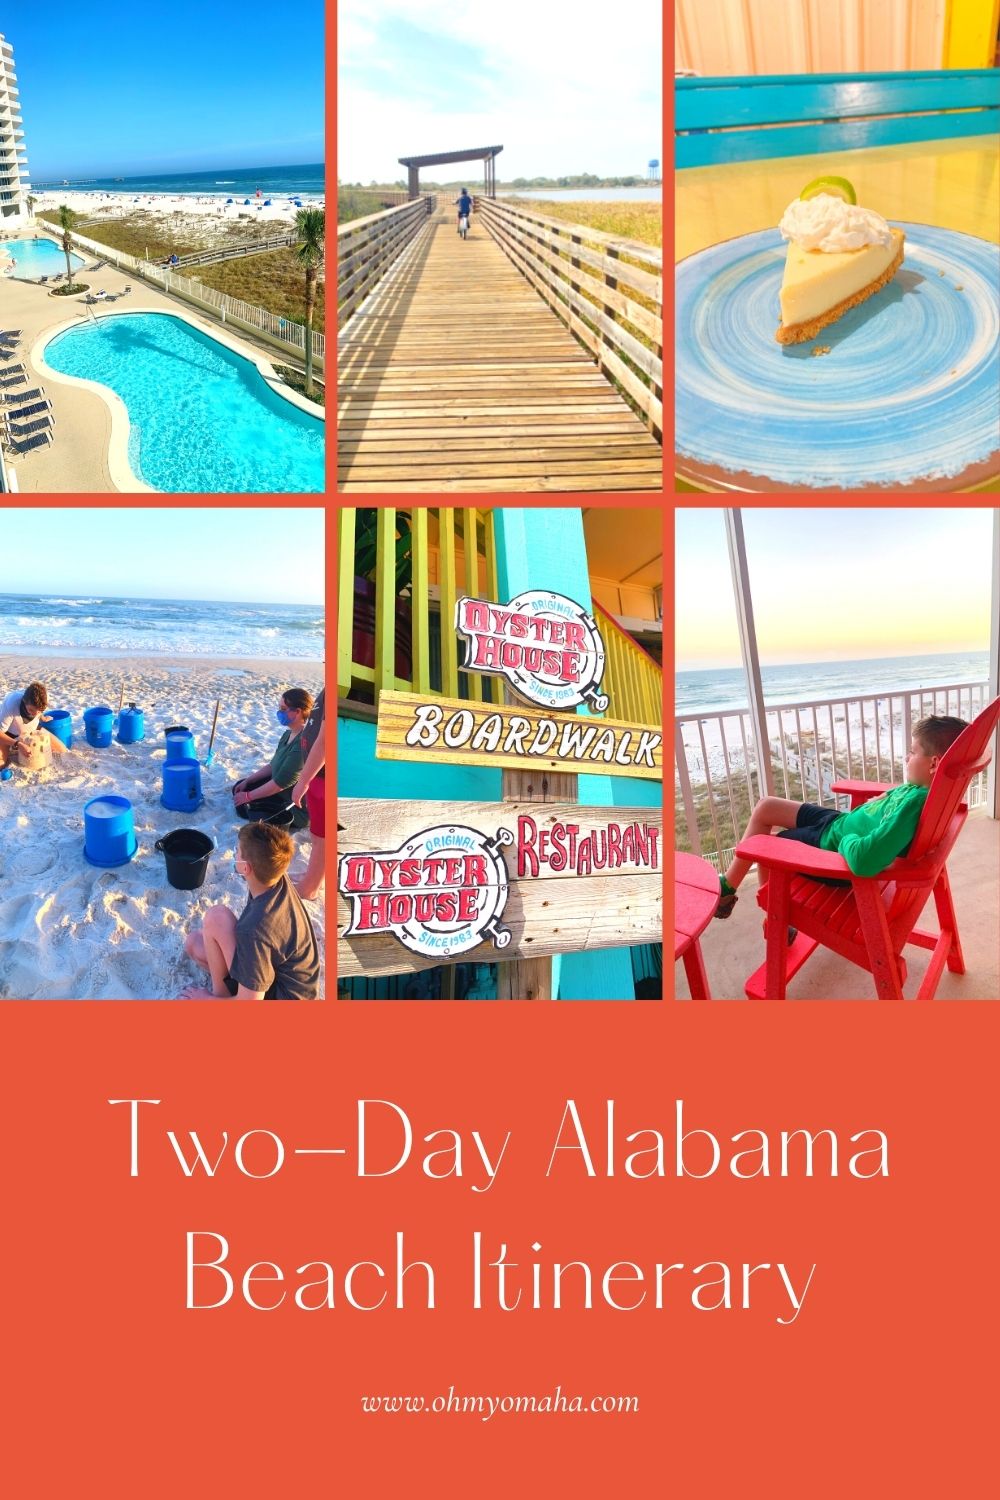 Tips and itinerary for the perfect Alabama beach vacation for families! Explore Gulf Shores & Orange Beach highlights including restaurants, activities, and beach fun.